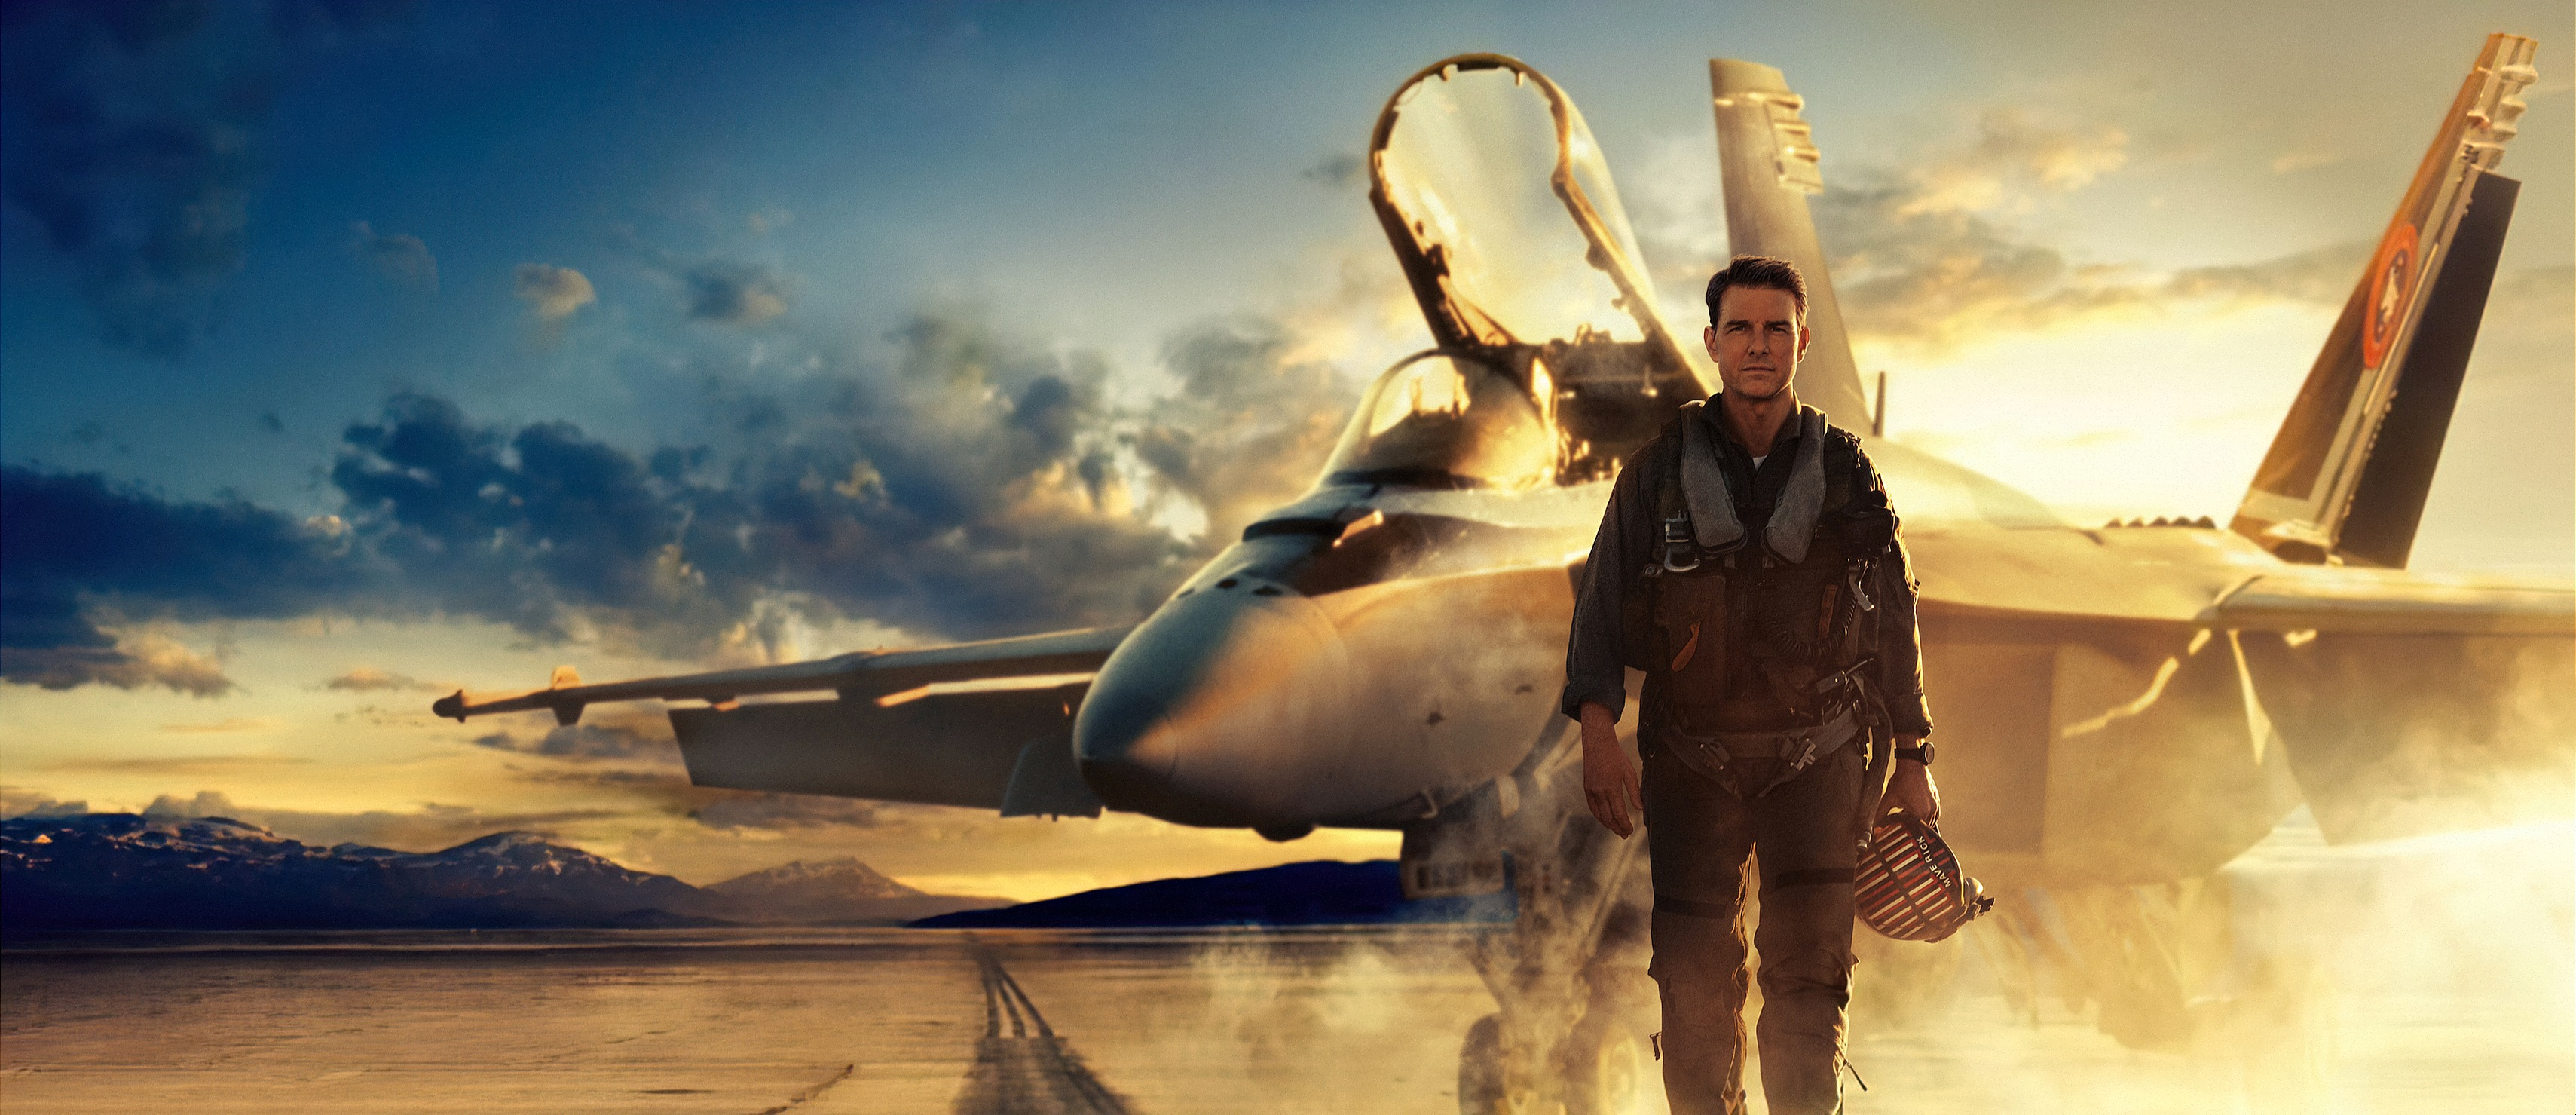 Top Gun: Maverick movie poster, with Tom Cruise in it.